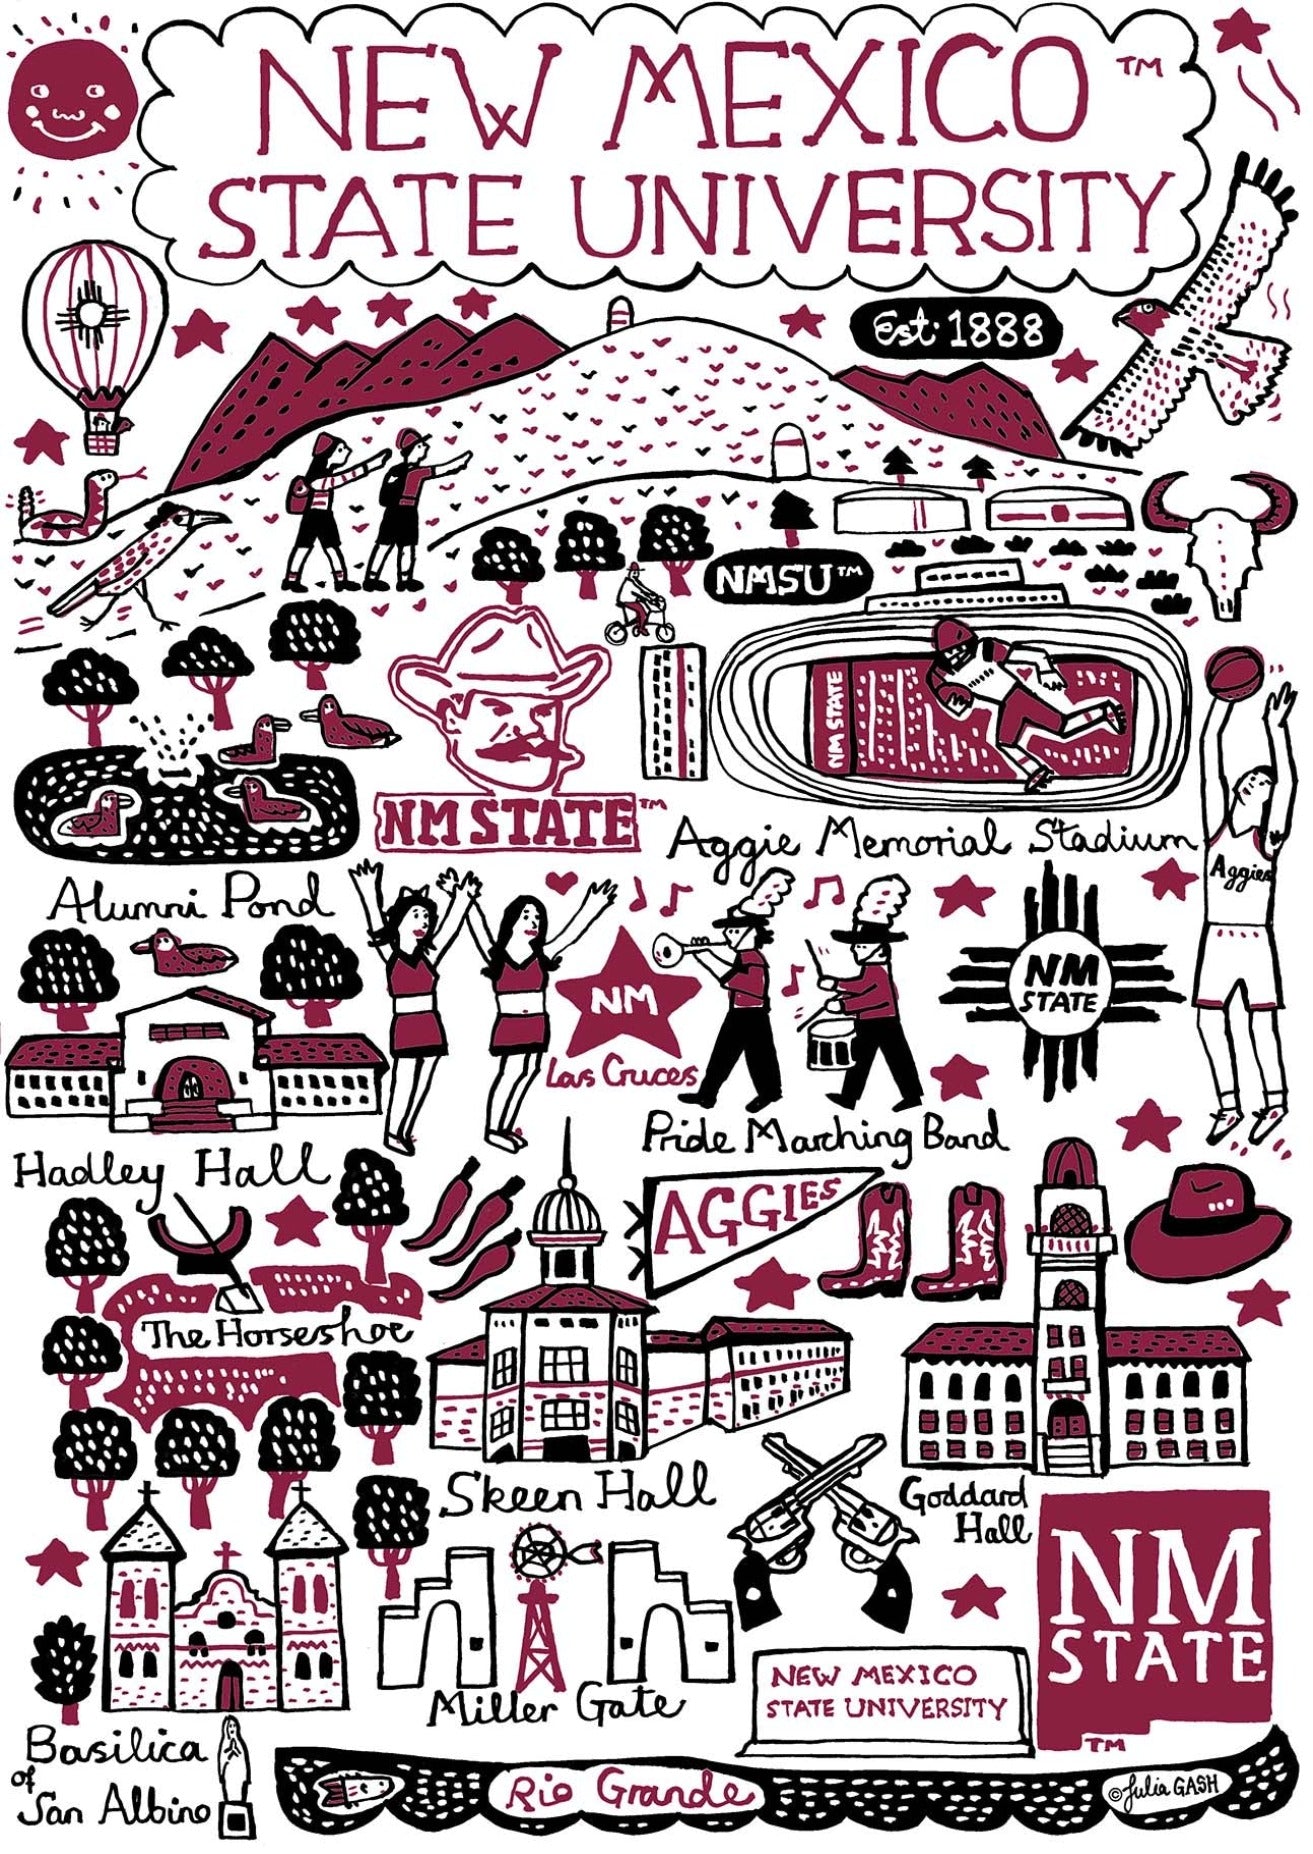 New Mexico State University by Julia Gash